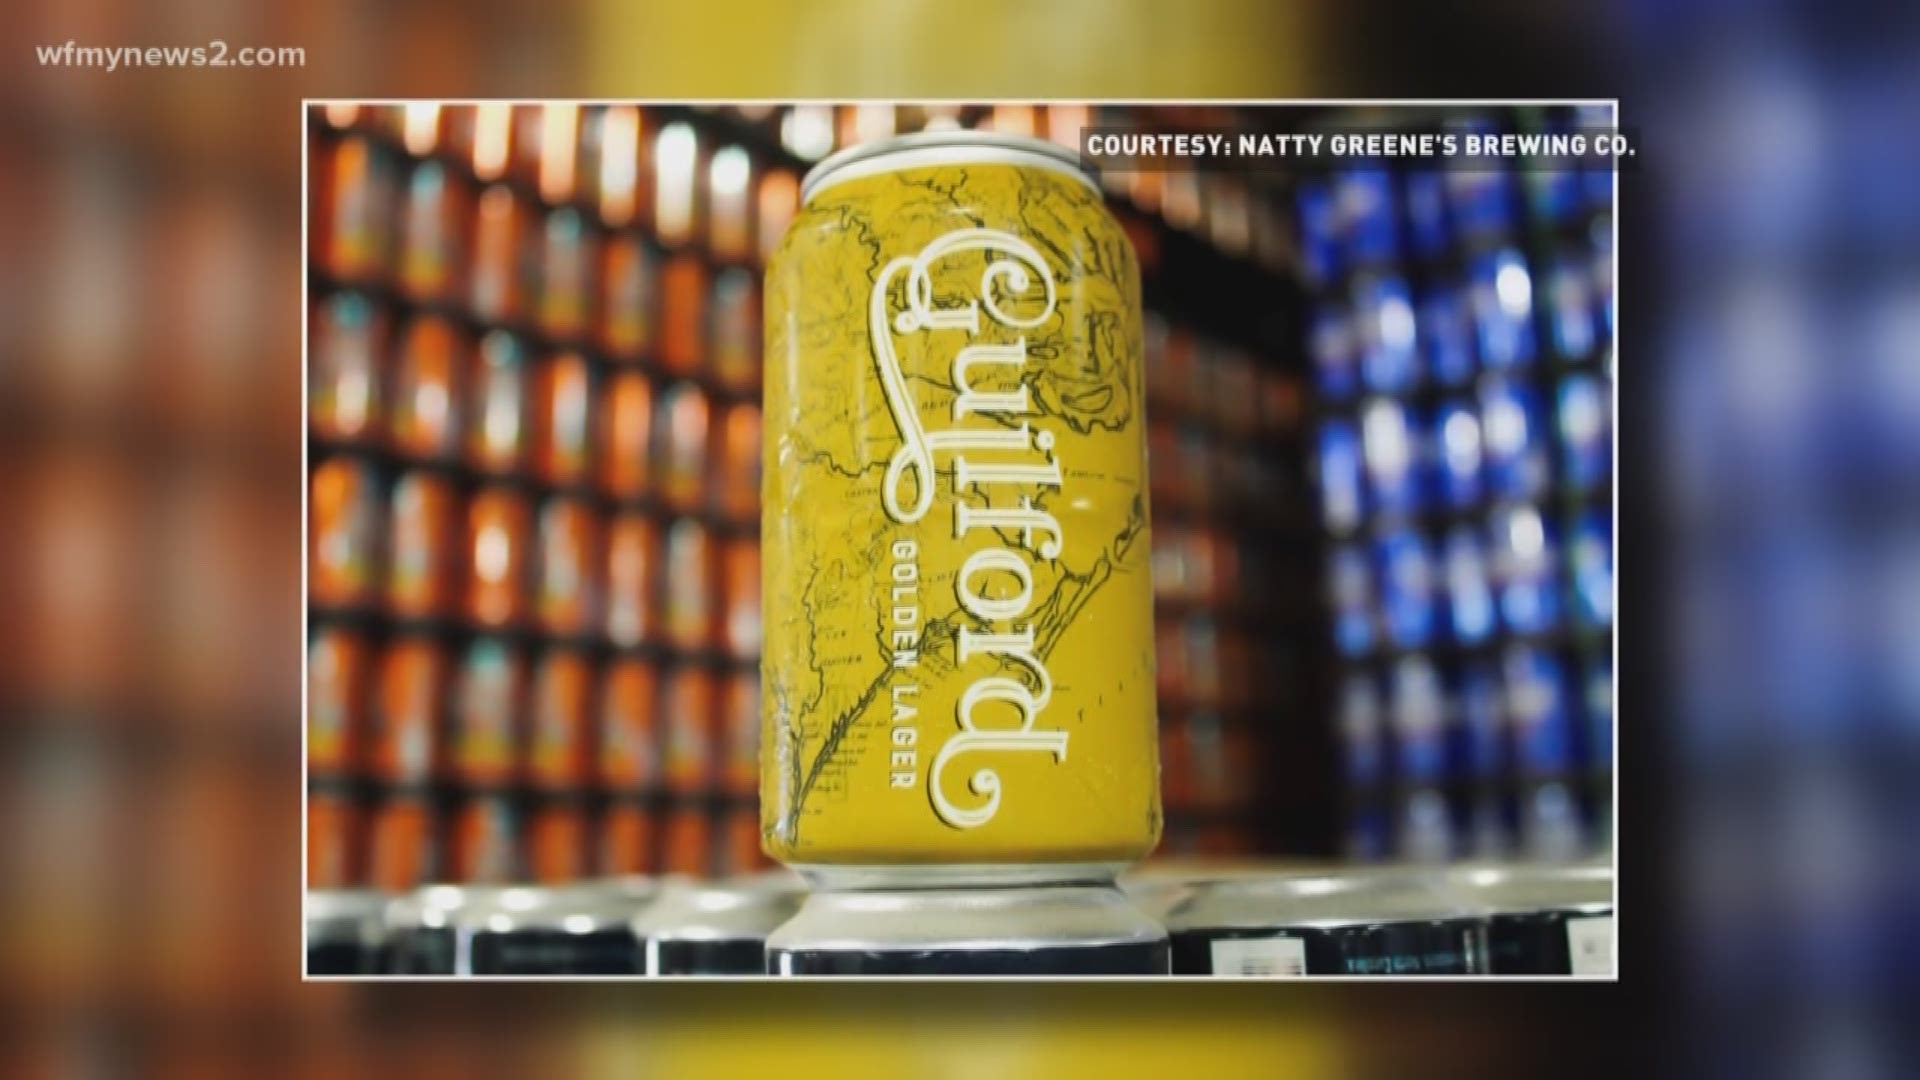 The Greensboro brewery is set to open the new taste room tomorrow night by the Greensboro Coliseum